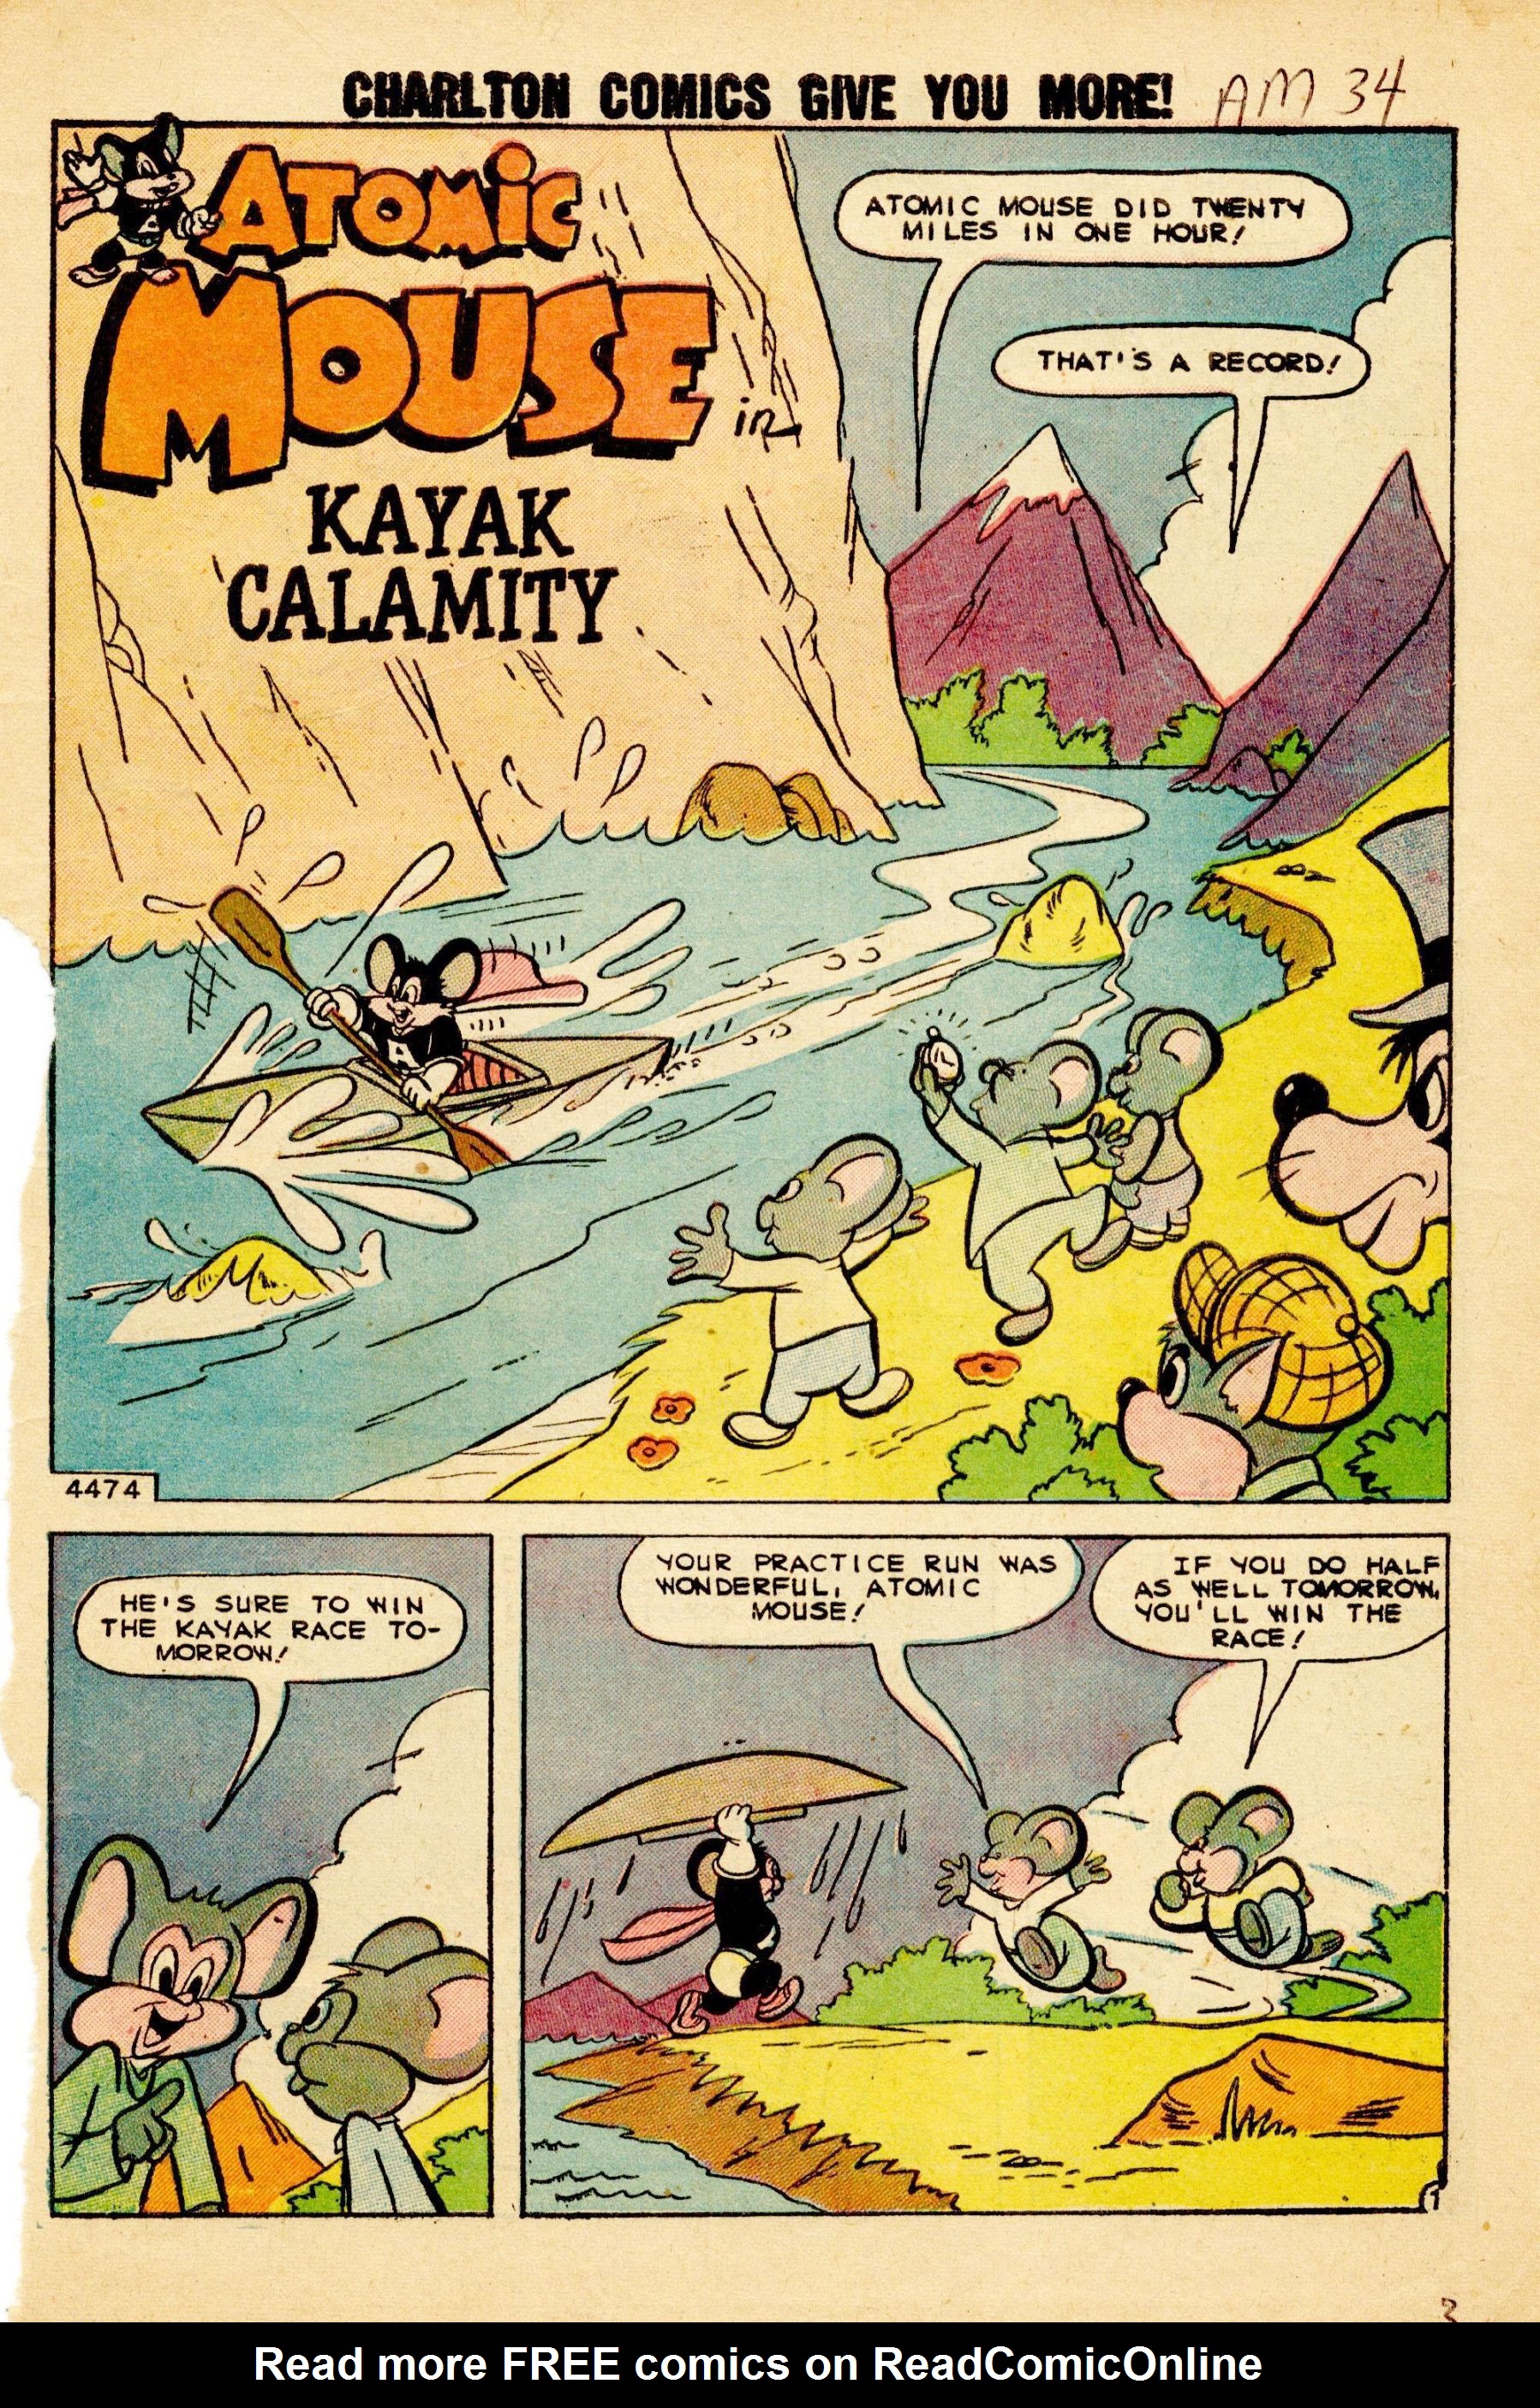 Read online Atomic Mouse comic -  Issue #34 - 3